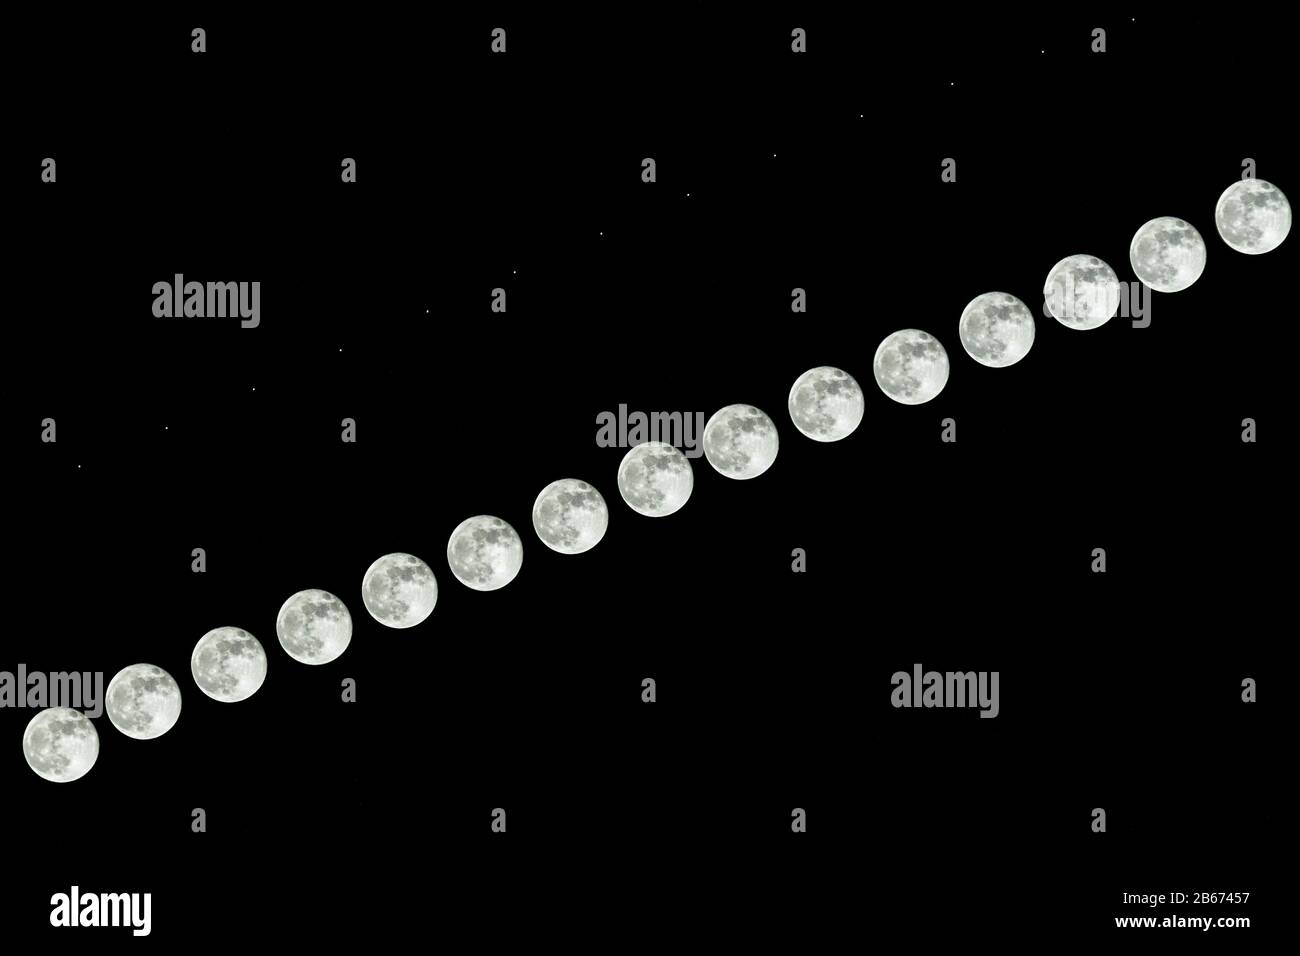 Sequence showing the Moon and Jupiter rising across a winter night sky Stock Photo